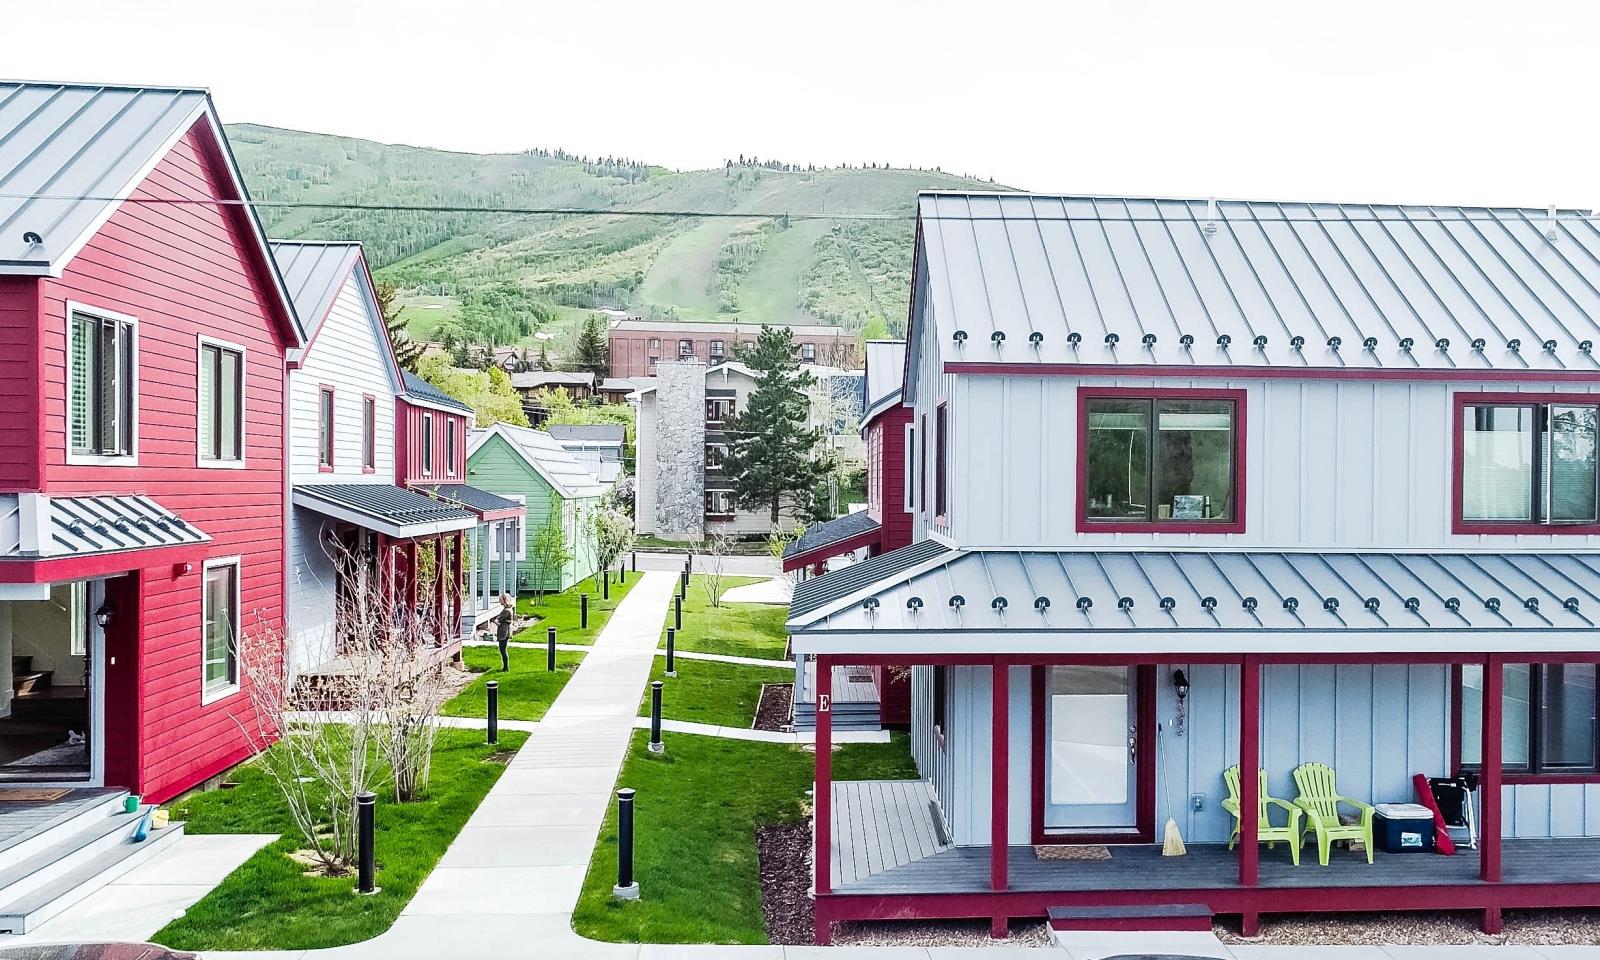 Retreat at the Park: 8 single-family homes in City Park, built in 2018.